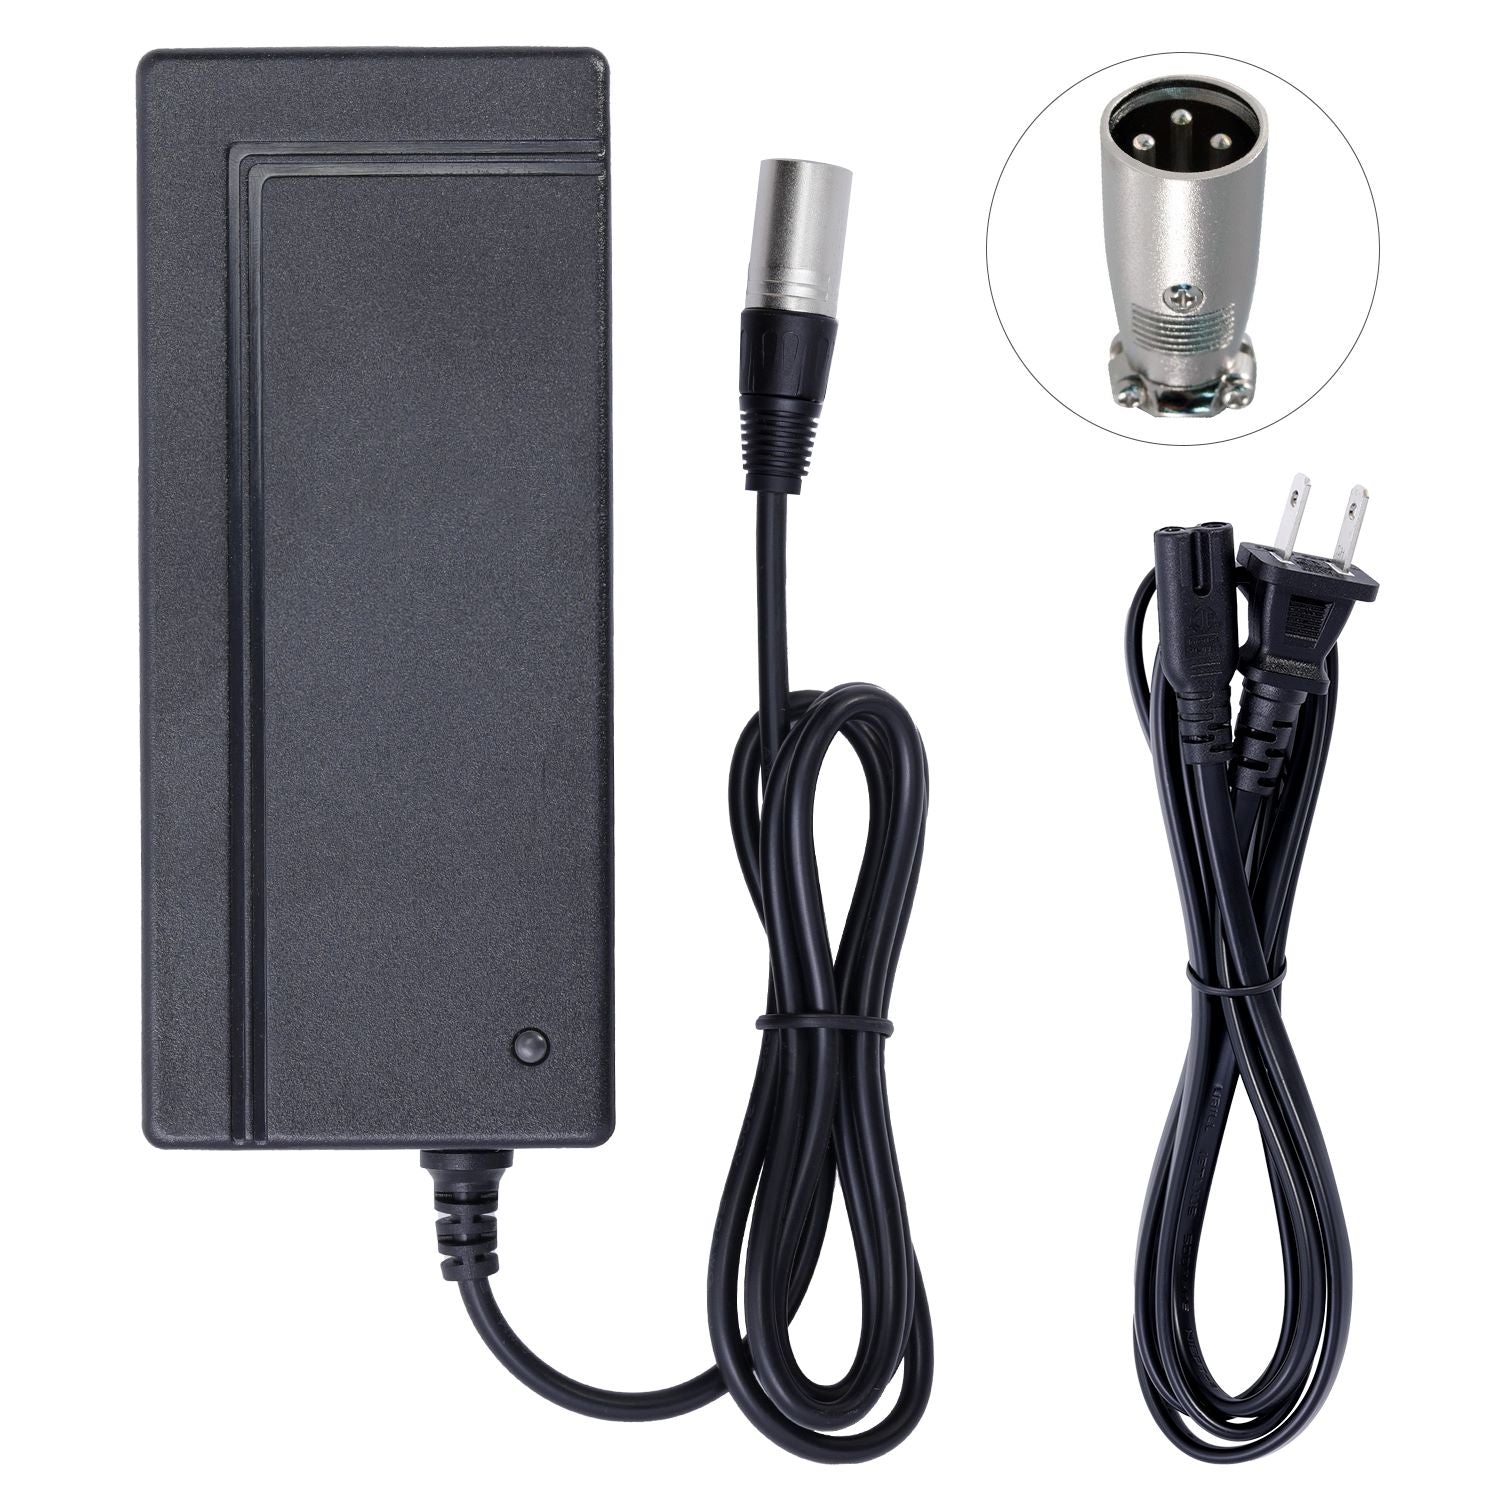 24V 2A UL Certified Charger for KYMCO Mini Comfort Mobility Scooter